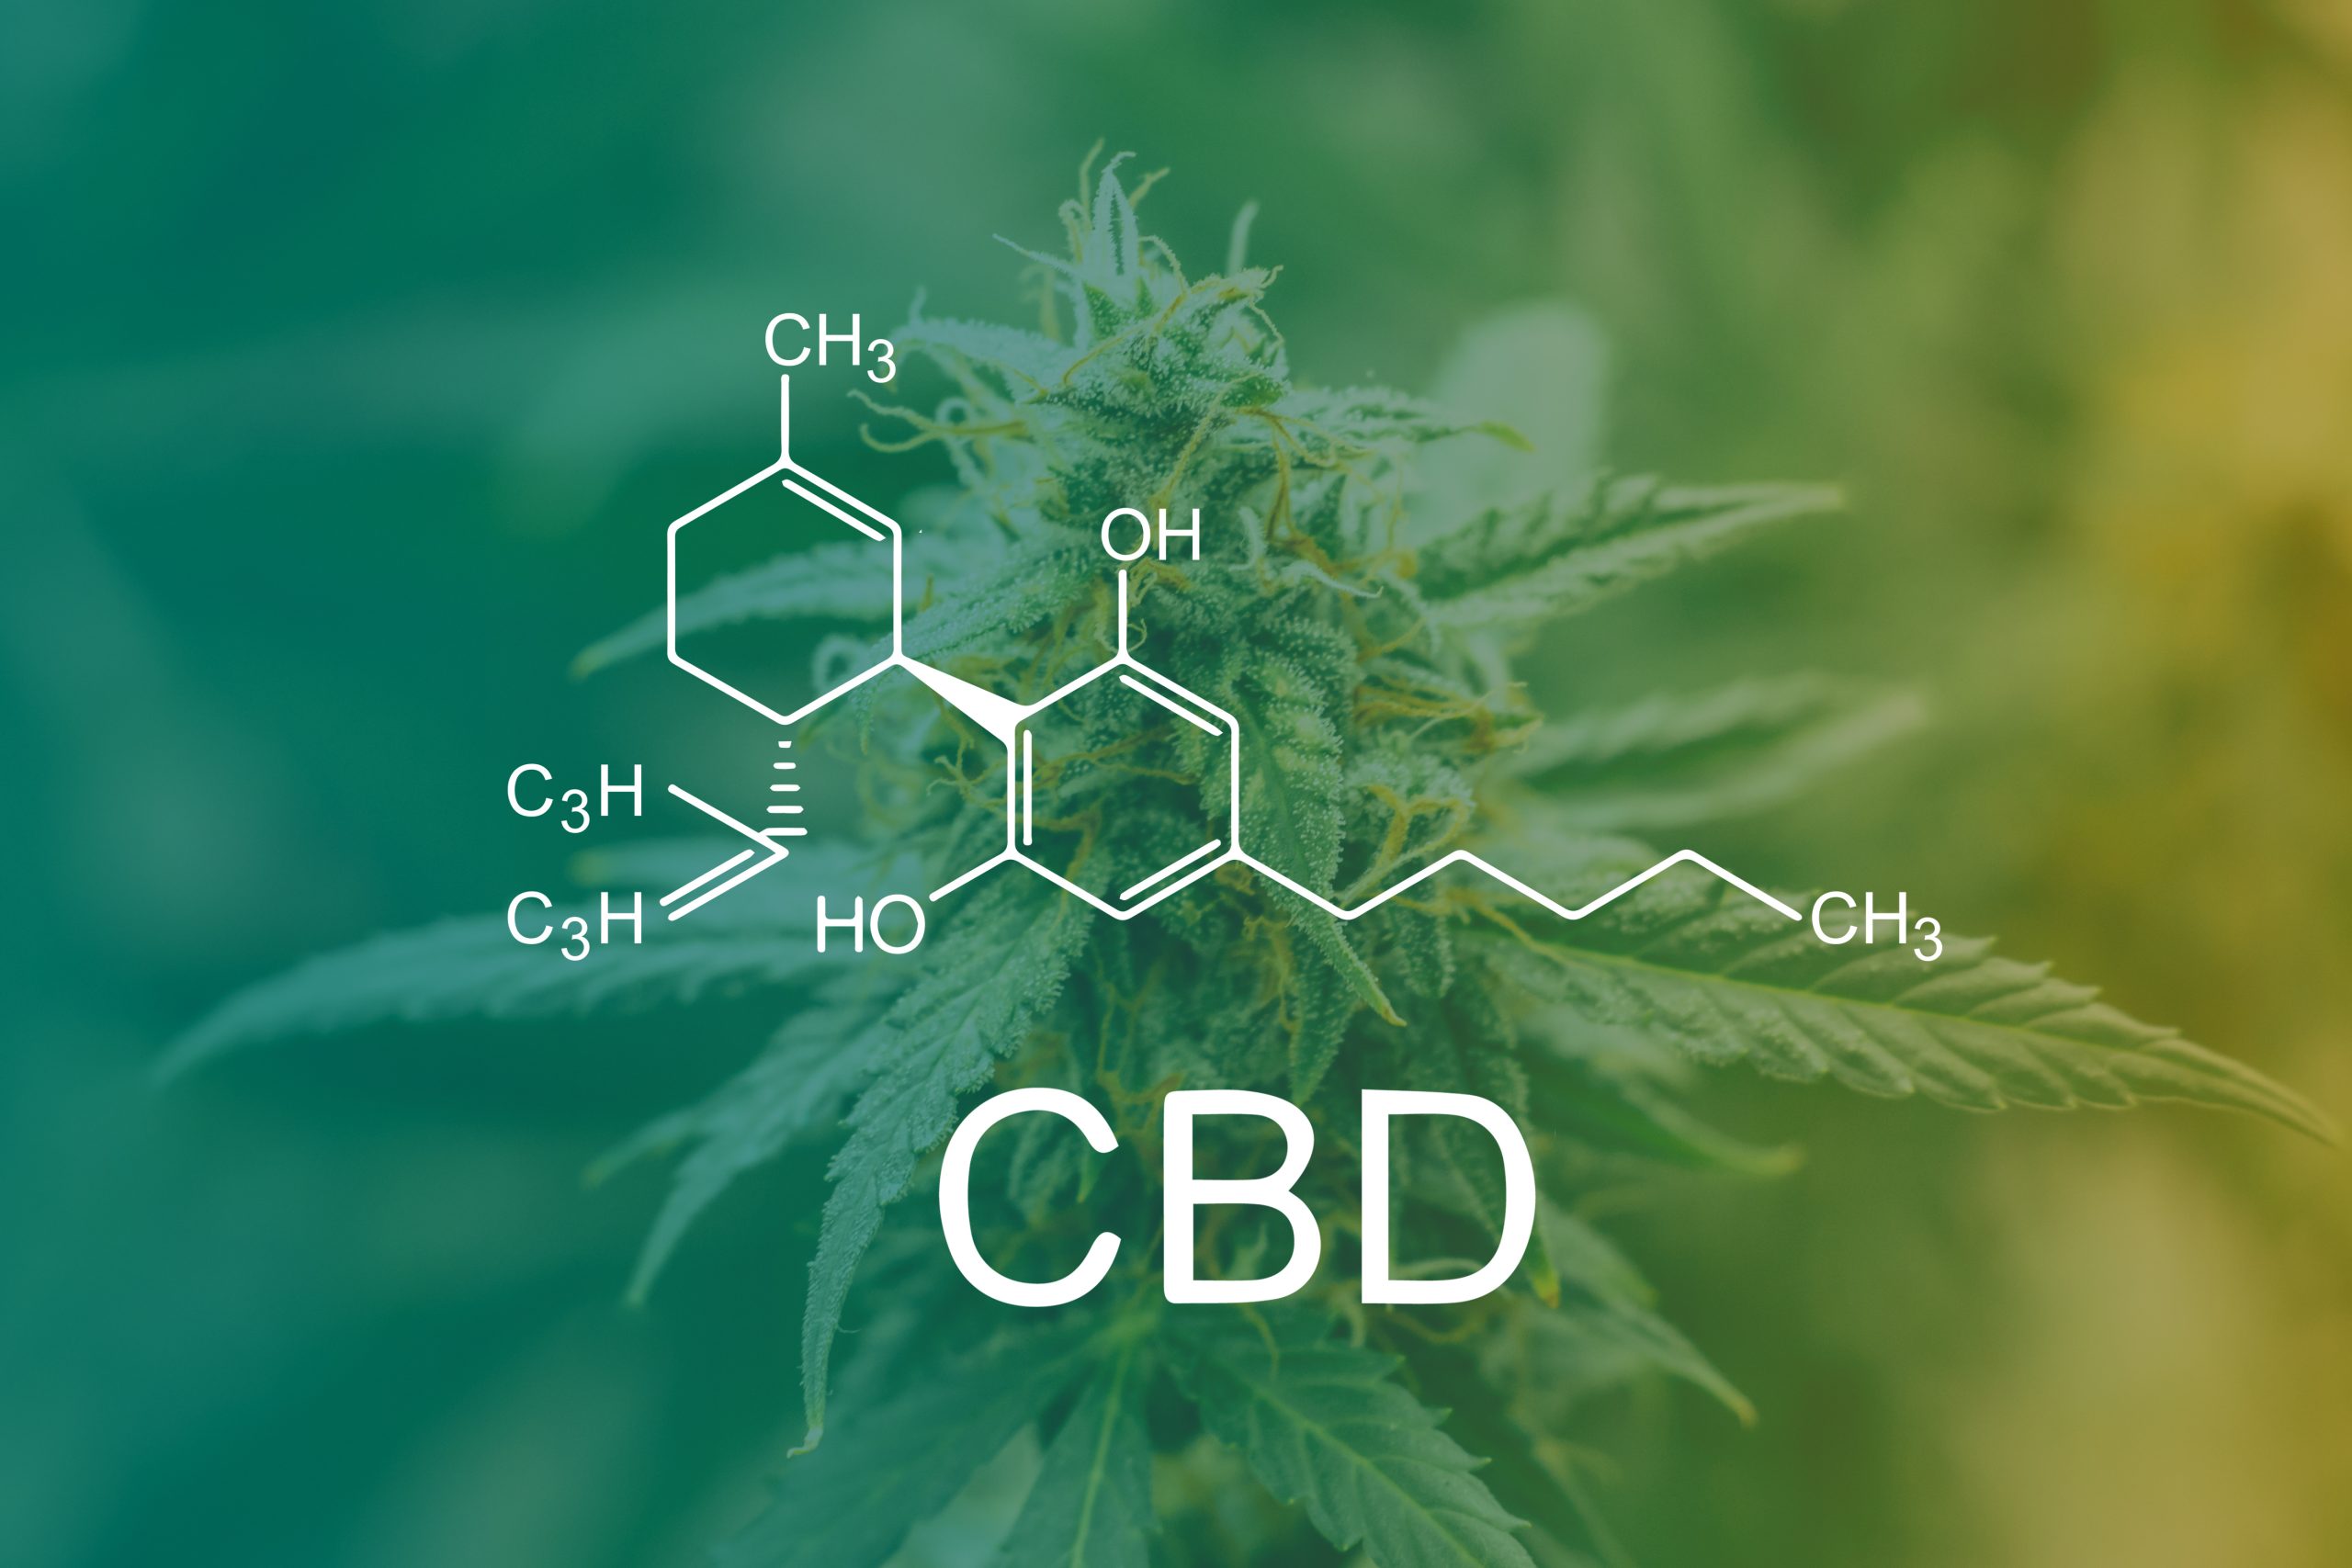 Featured image depicting a watermark photographic image of a cannabis flower bud, overlayed with an image of the Molecular Map of a CBD molecule